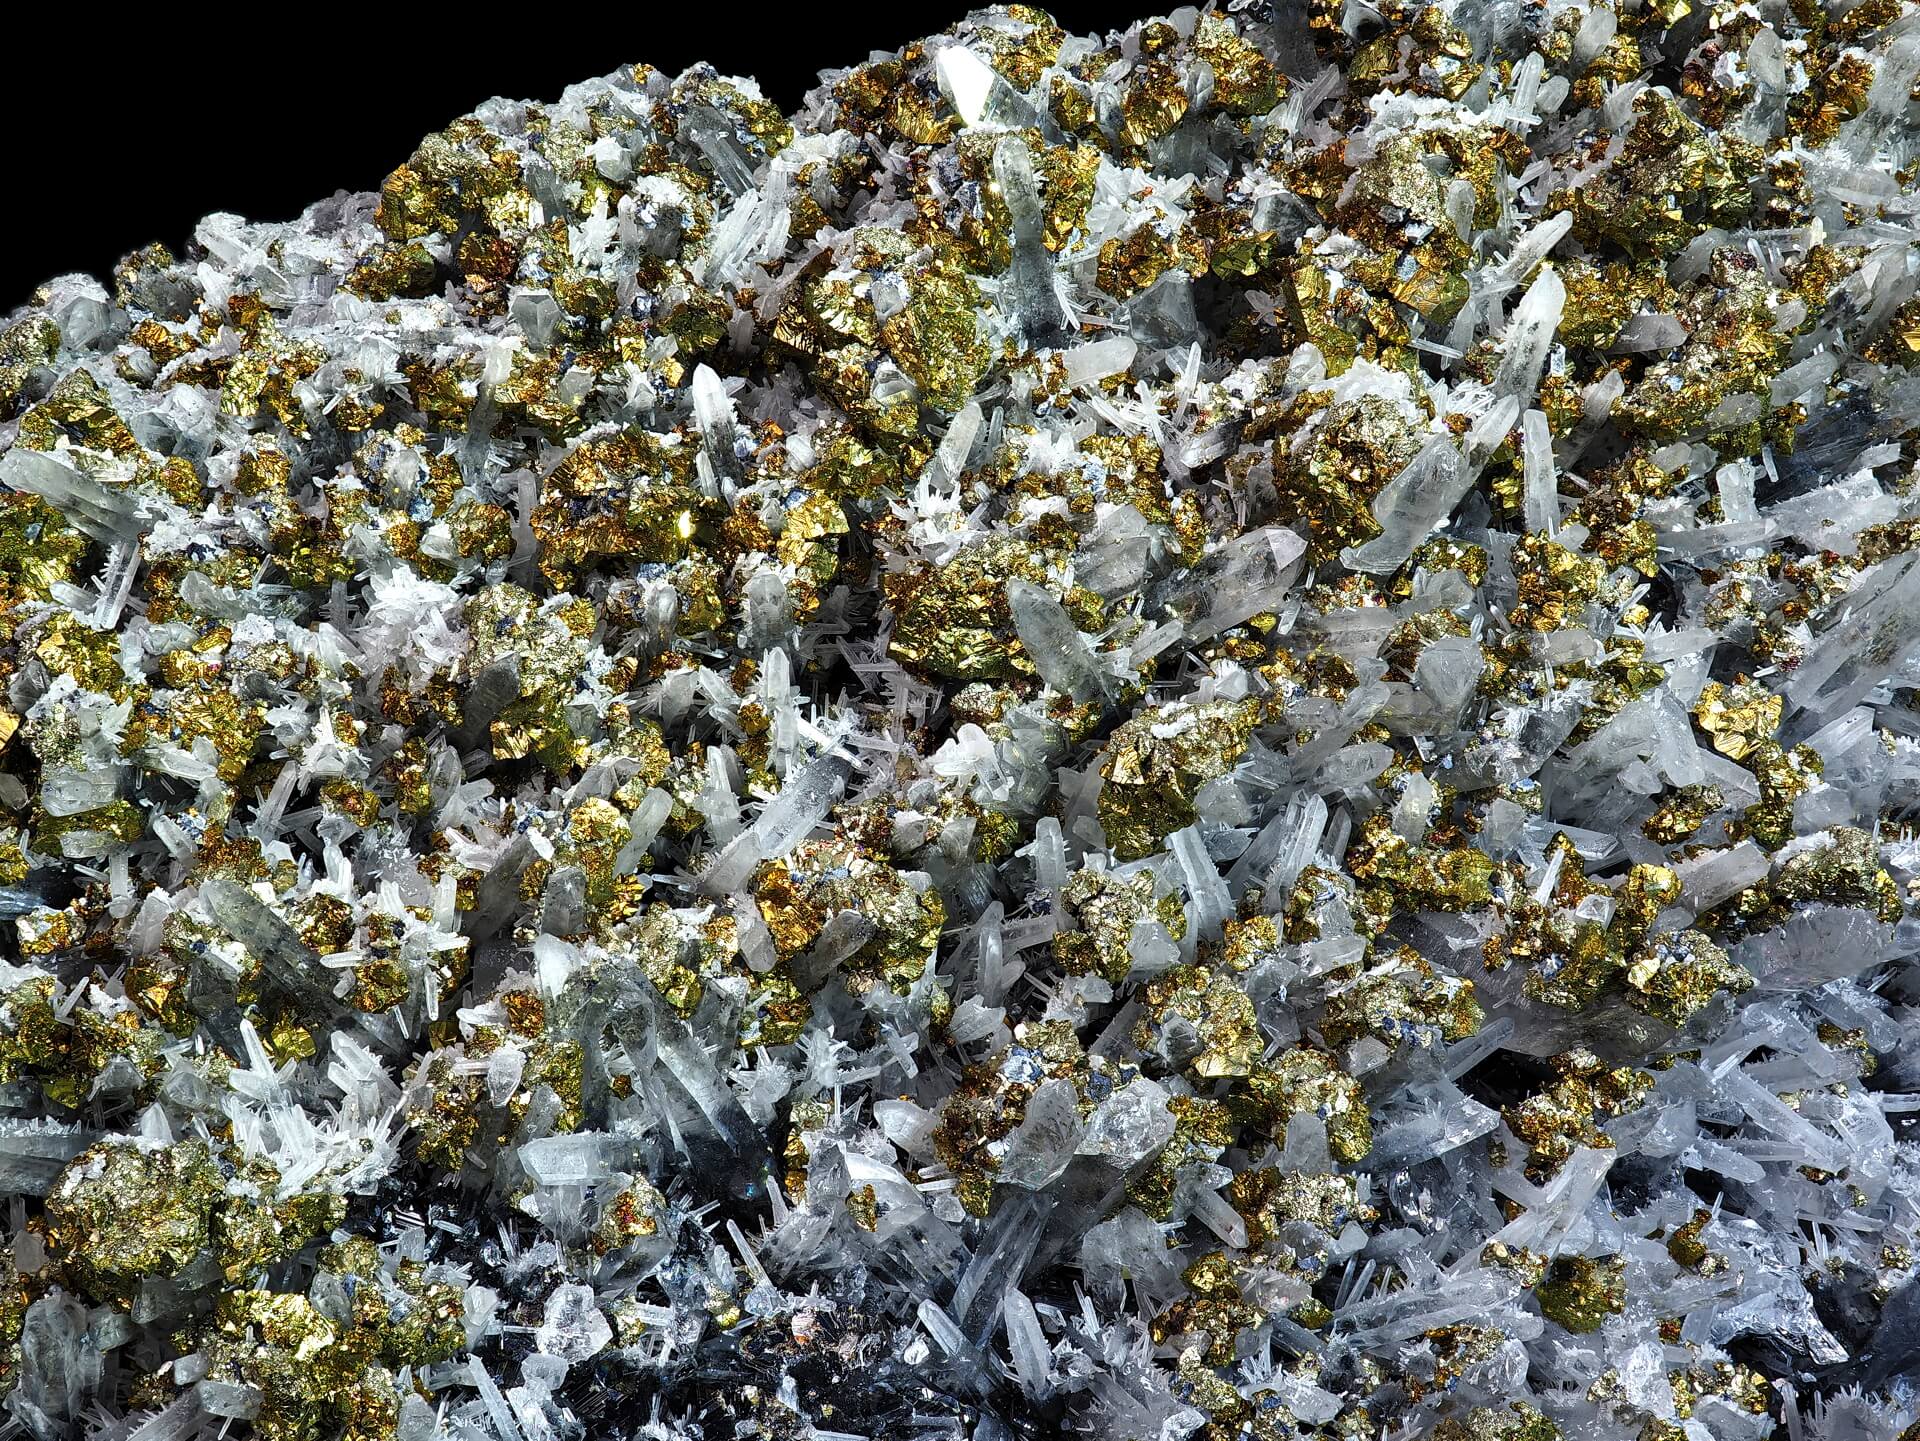 Abundant Chalcopyrite formed around and between small and large Quartz crystals, on an almost unseen Galena matrix.